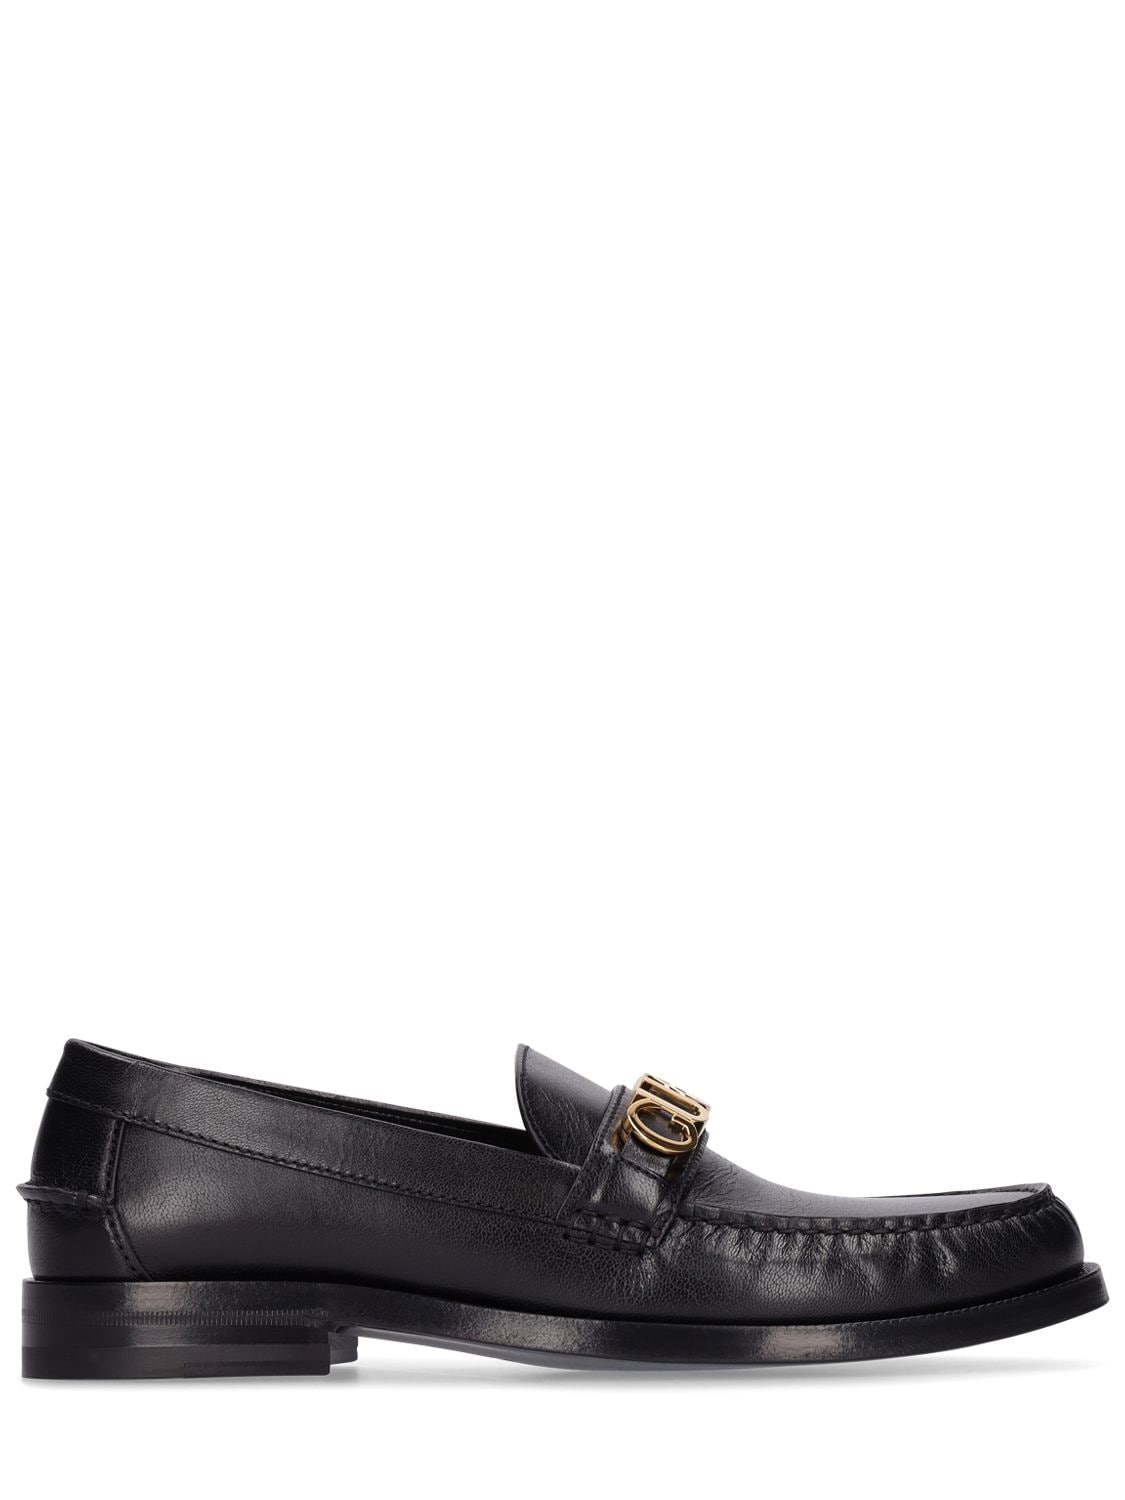 GUCCI 15MM CARA LEATHER LOAFERS